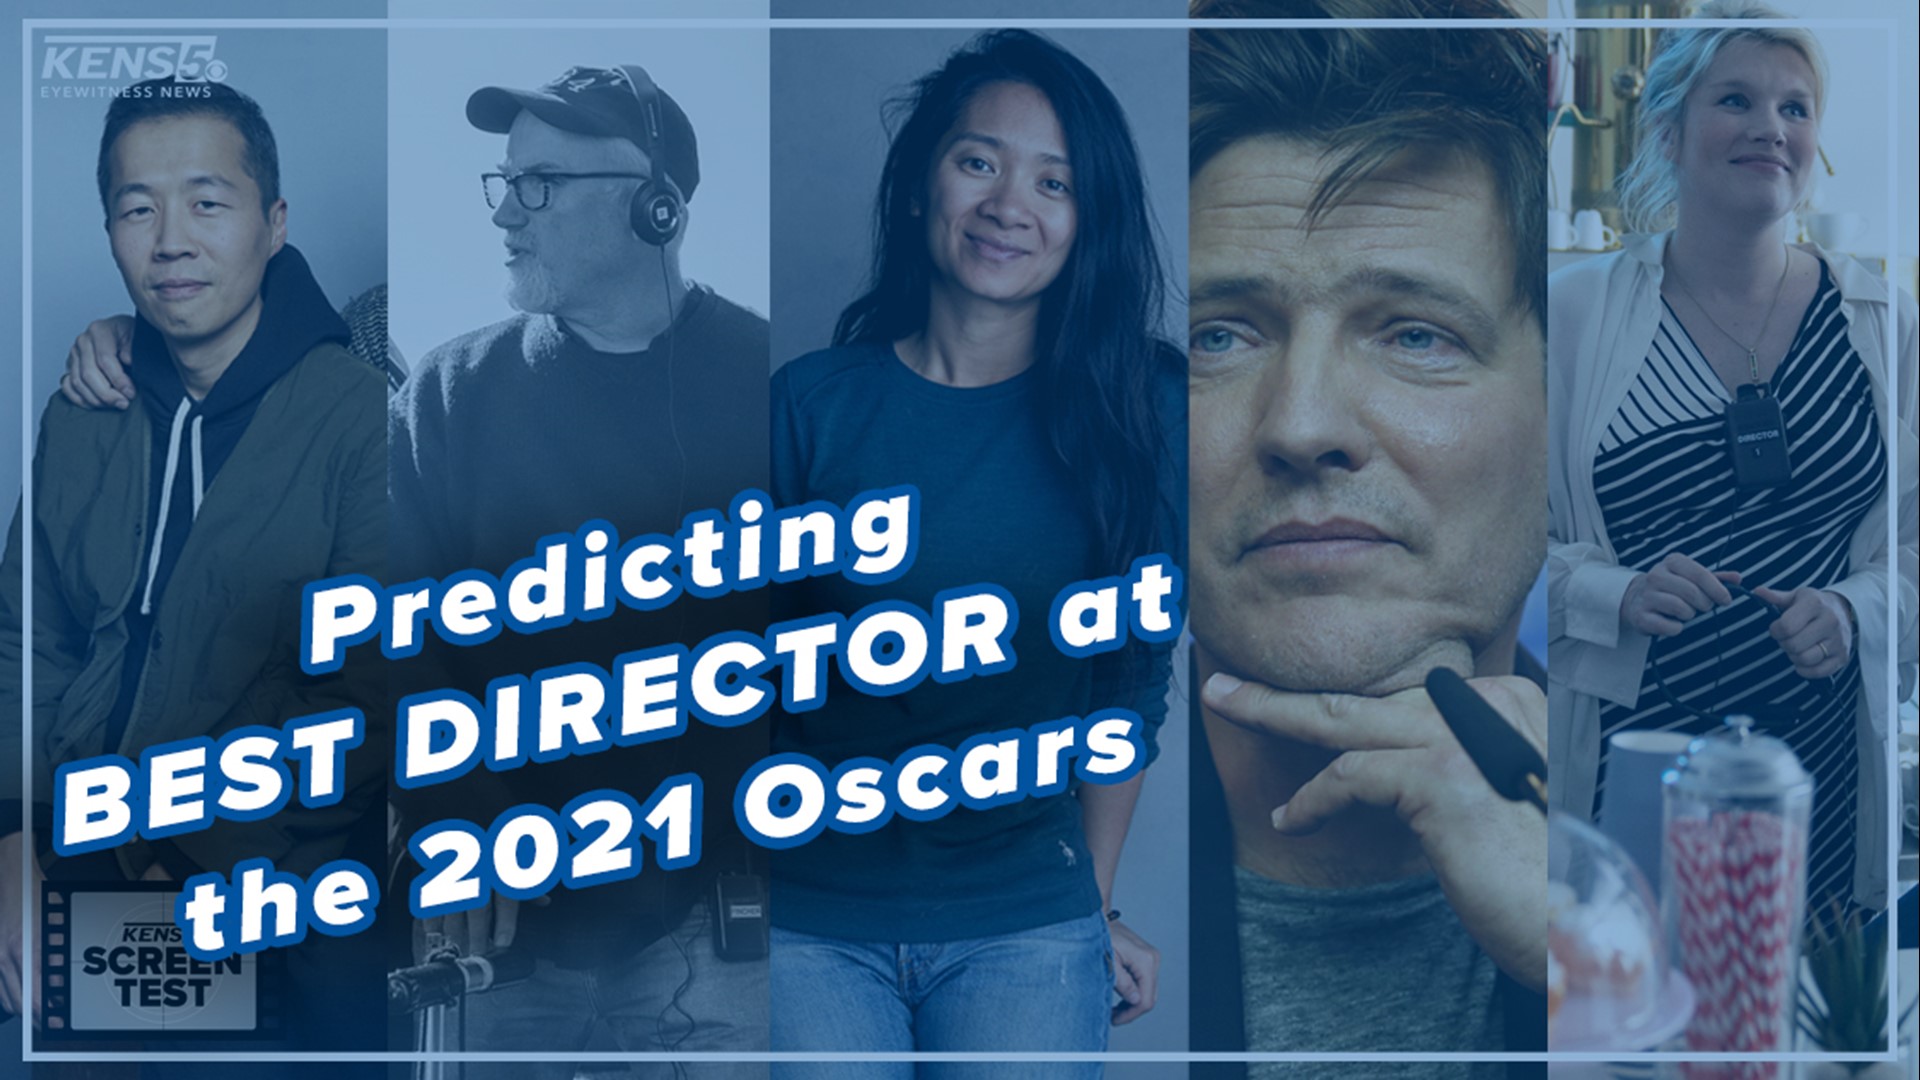 This year's Best Director field is a historically diverse field, as well as a varied one that includes international filmmakers, fresh faces and Hollywood veterans.